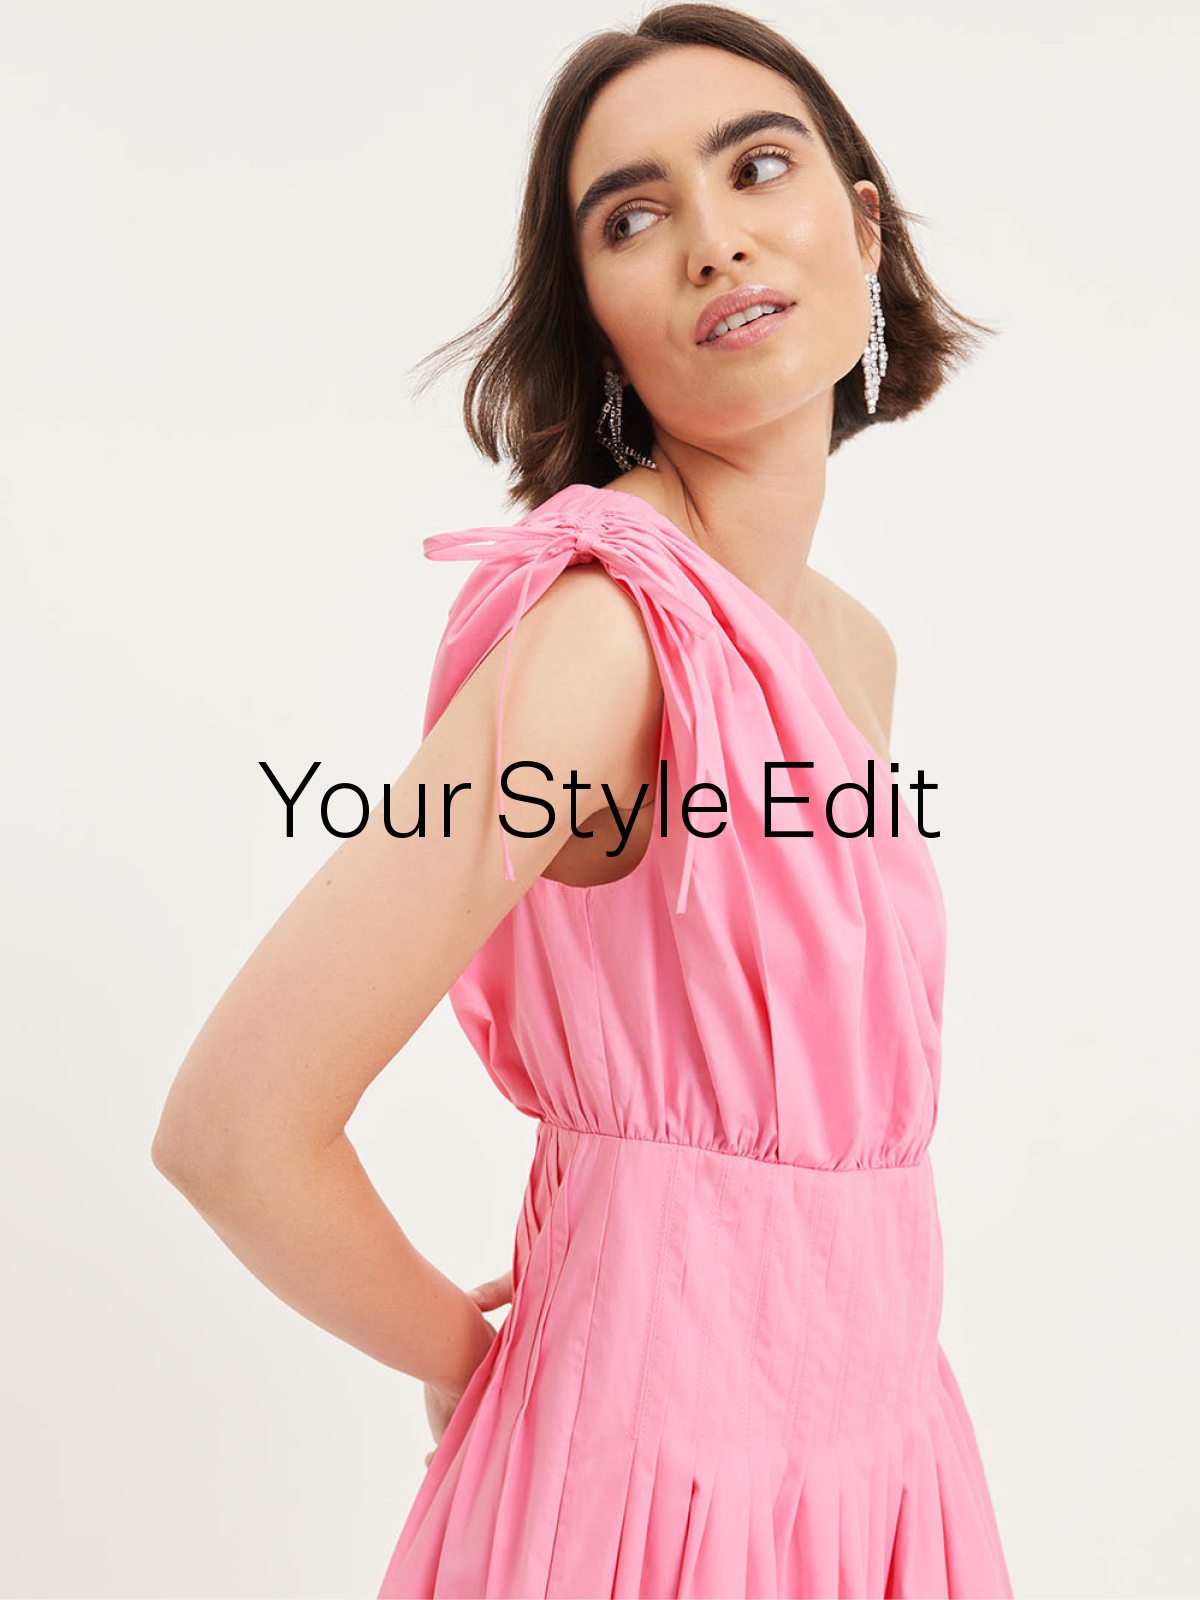 Your Style Edit